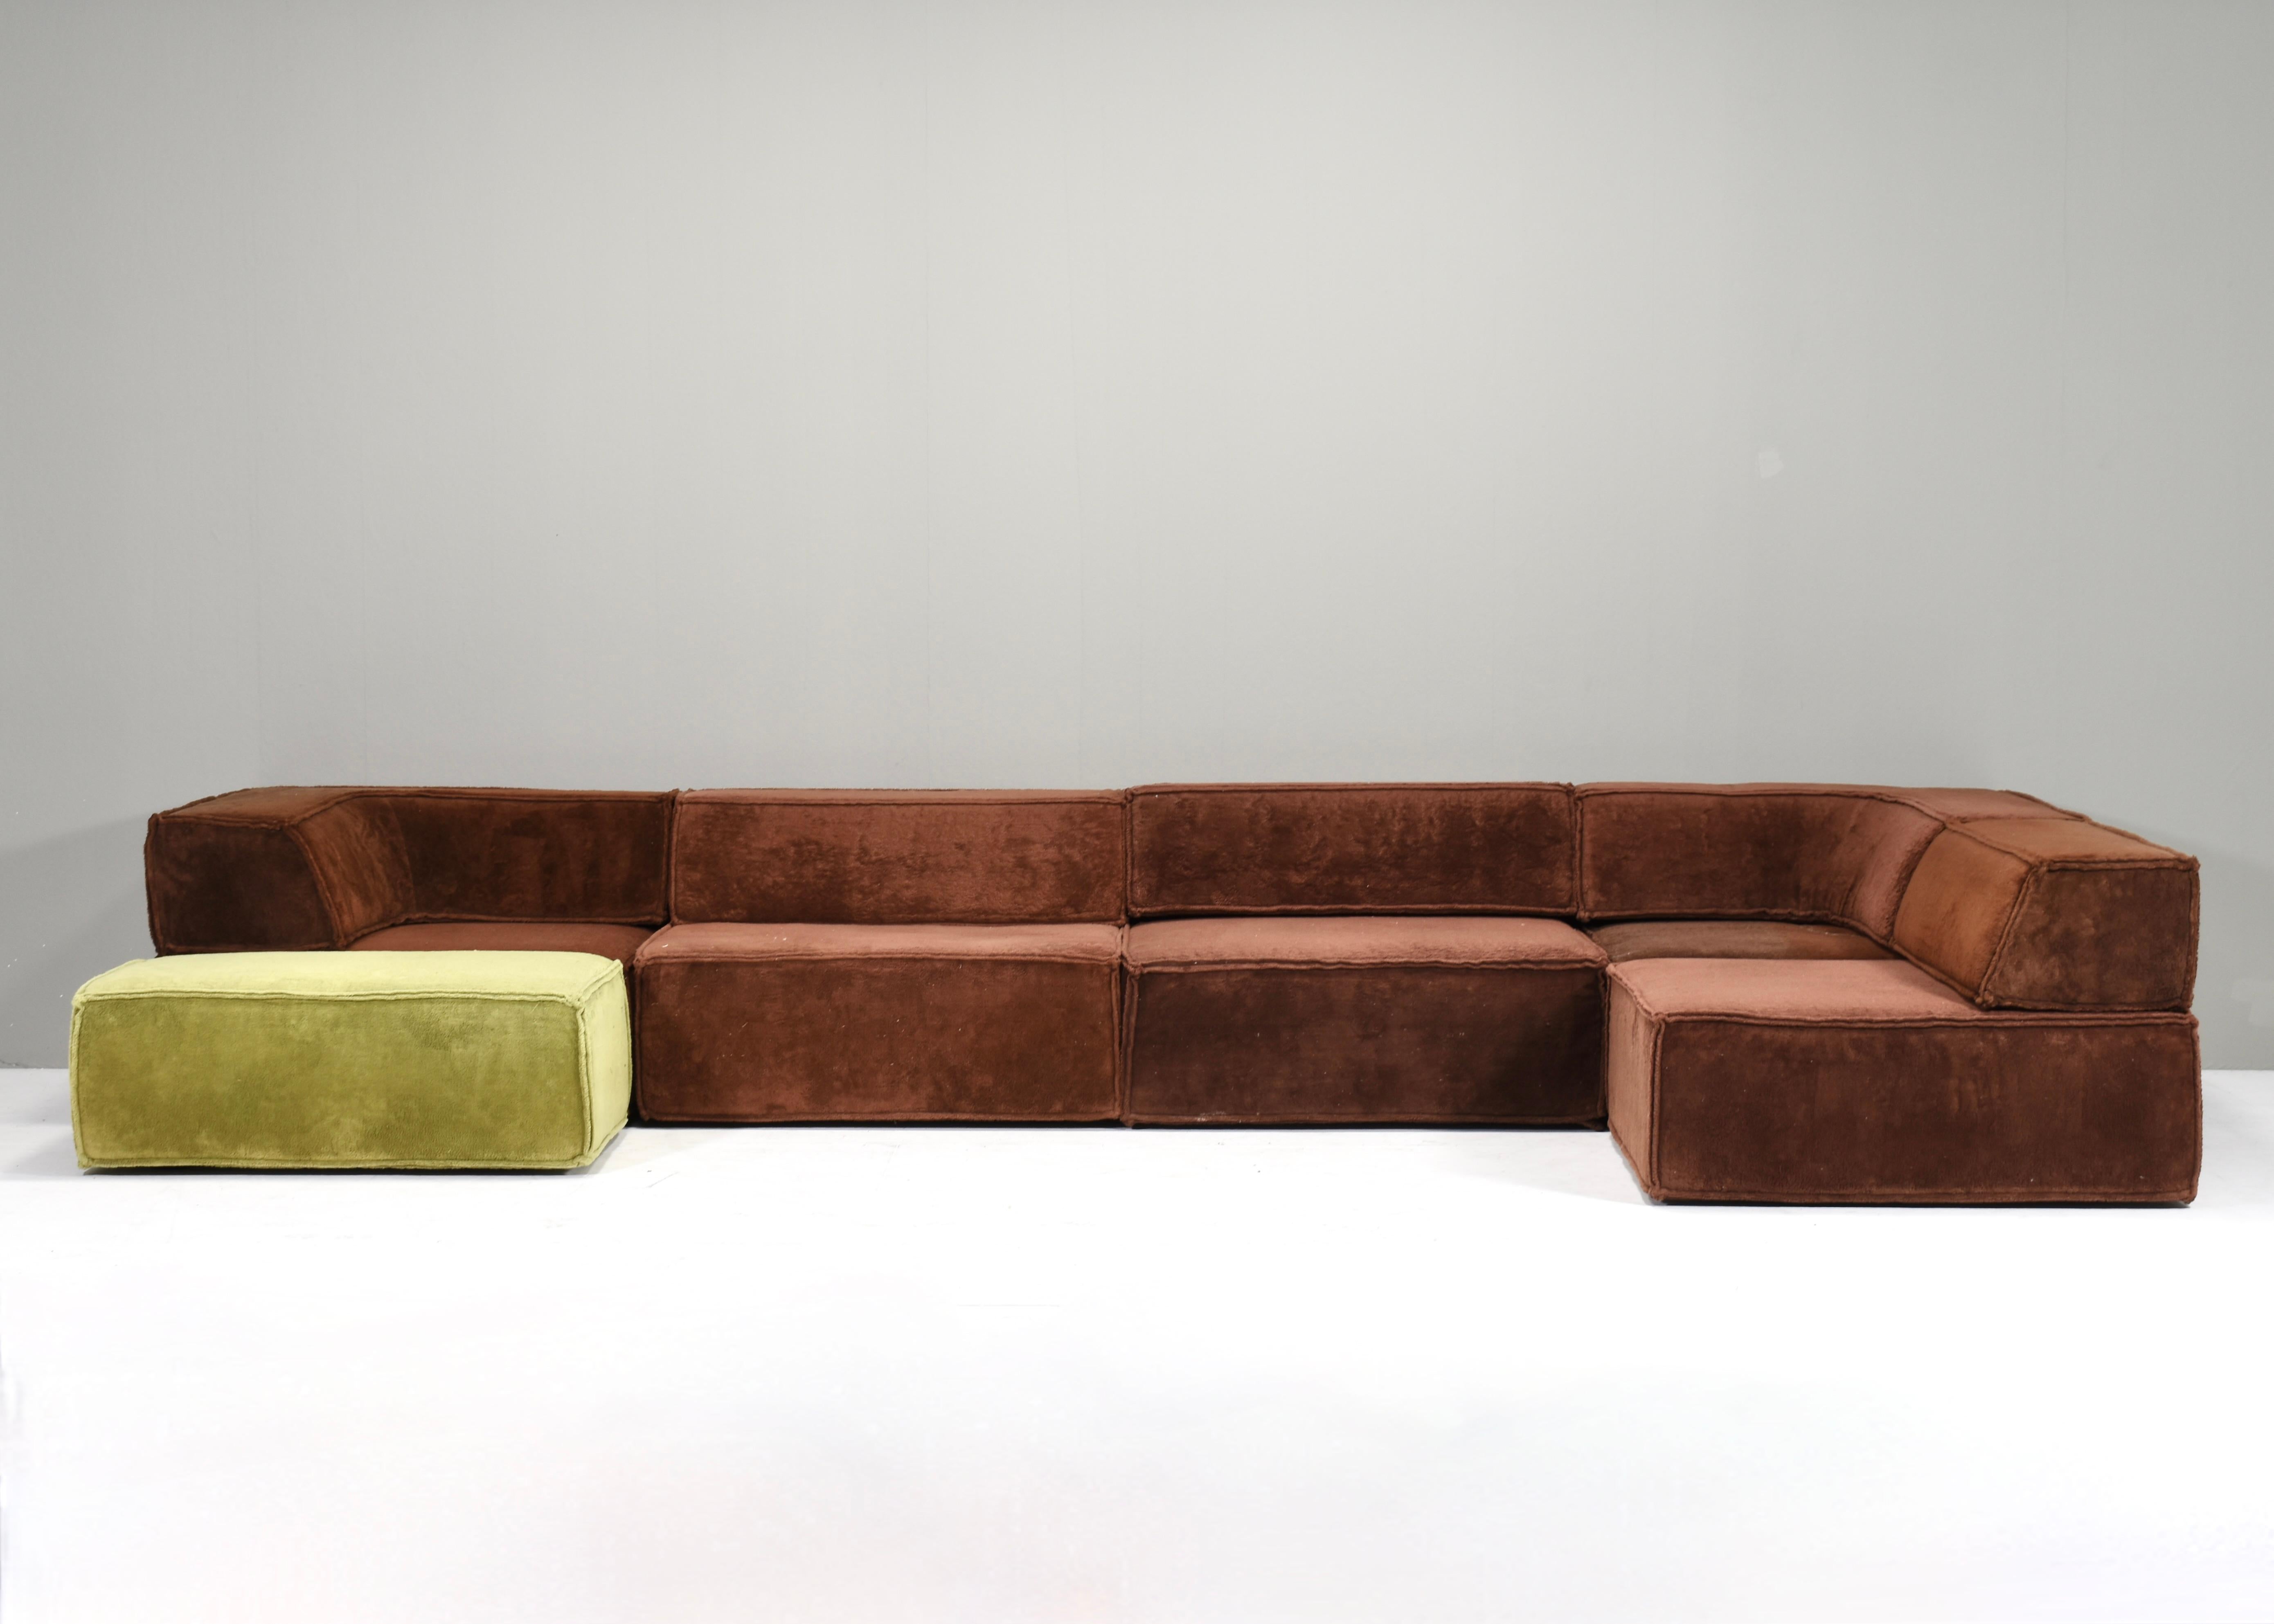 COR Trio Sectional Sofa for REUPHOLSTERING, Germany / Switzerland, 1972 In Distressed Condition For Sale In Pijnacker, Zuid-Holland